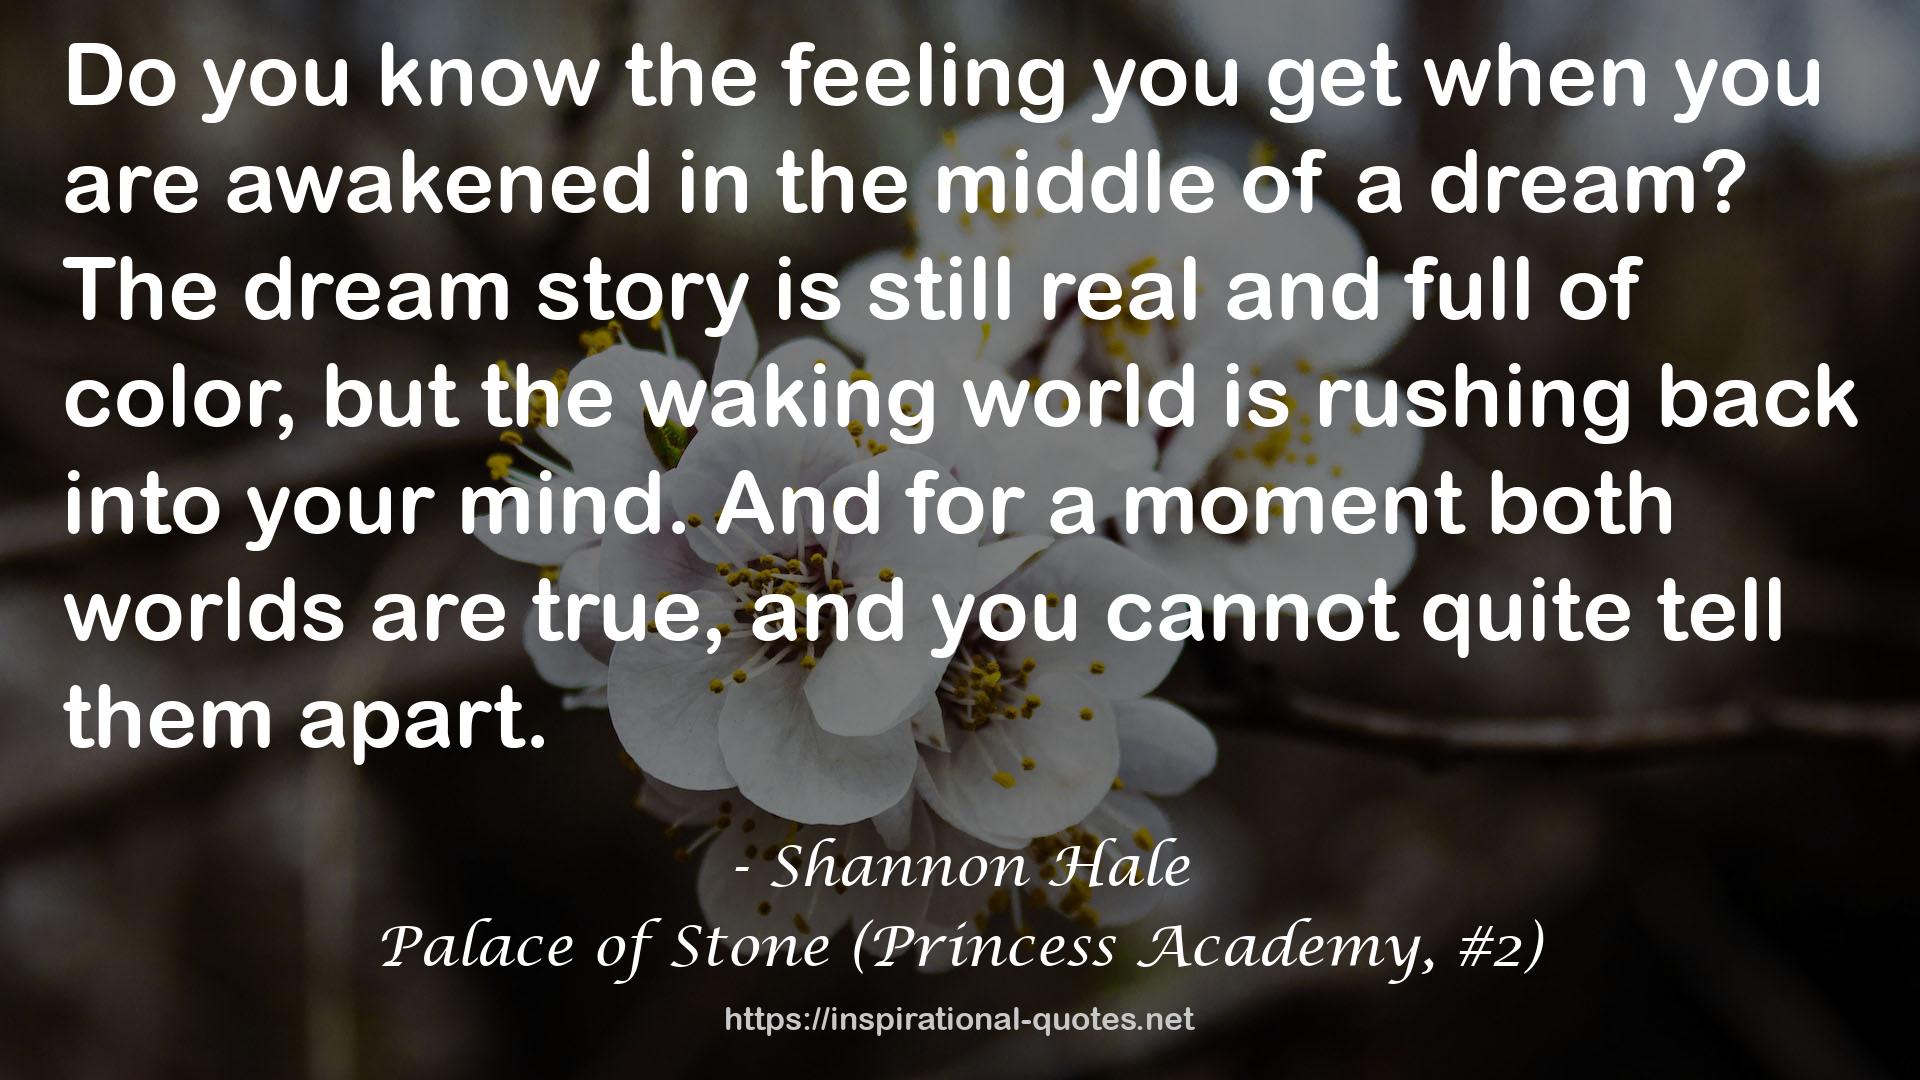 Palace of Stone (Princess Academy, #2) QUOTES